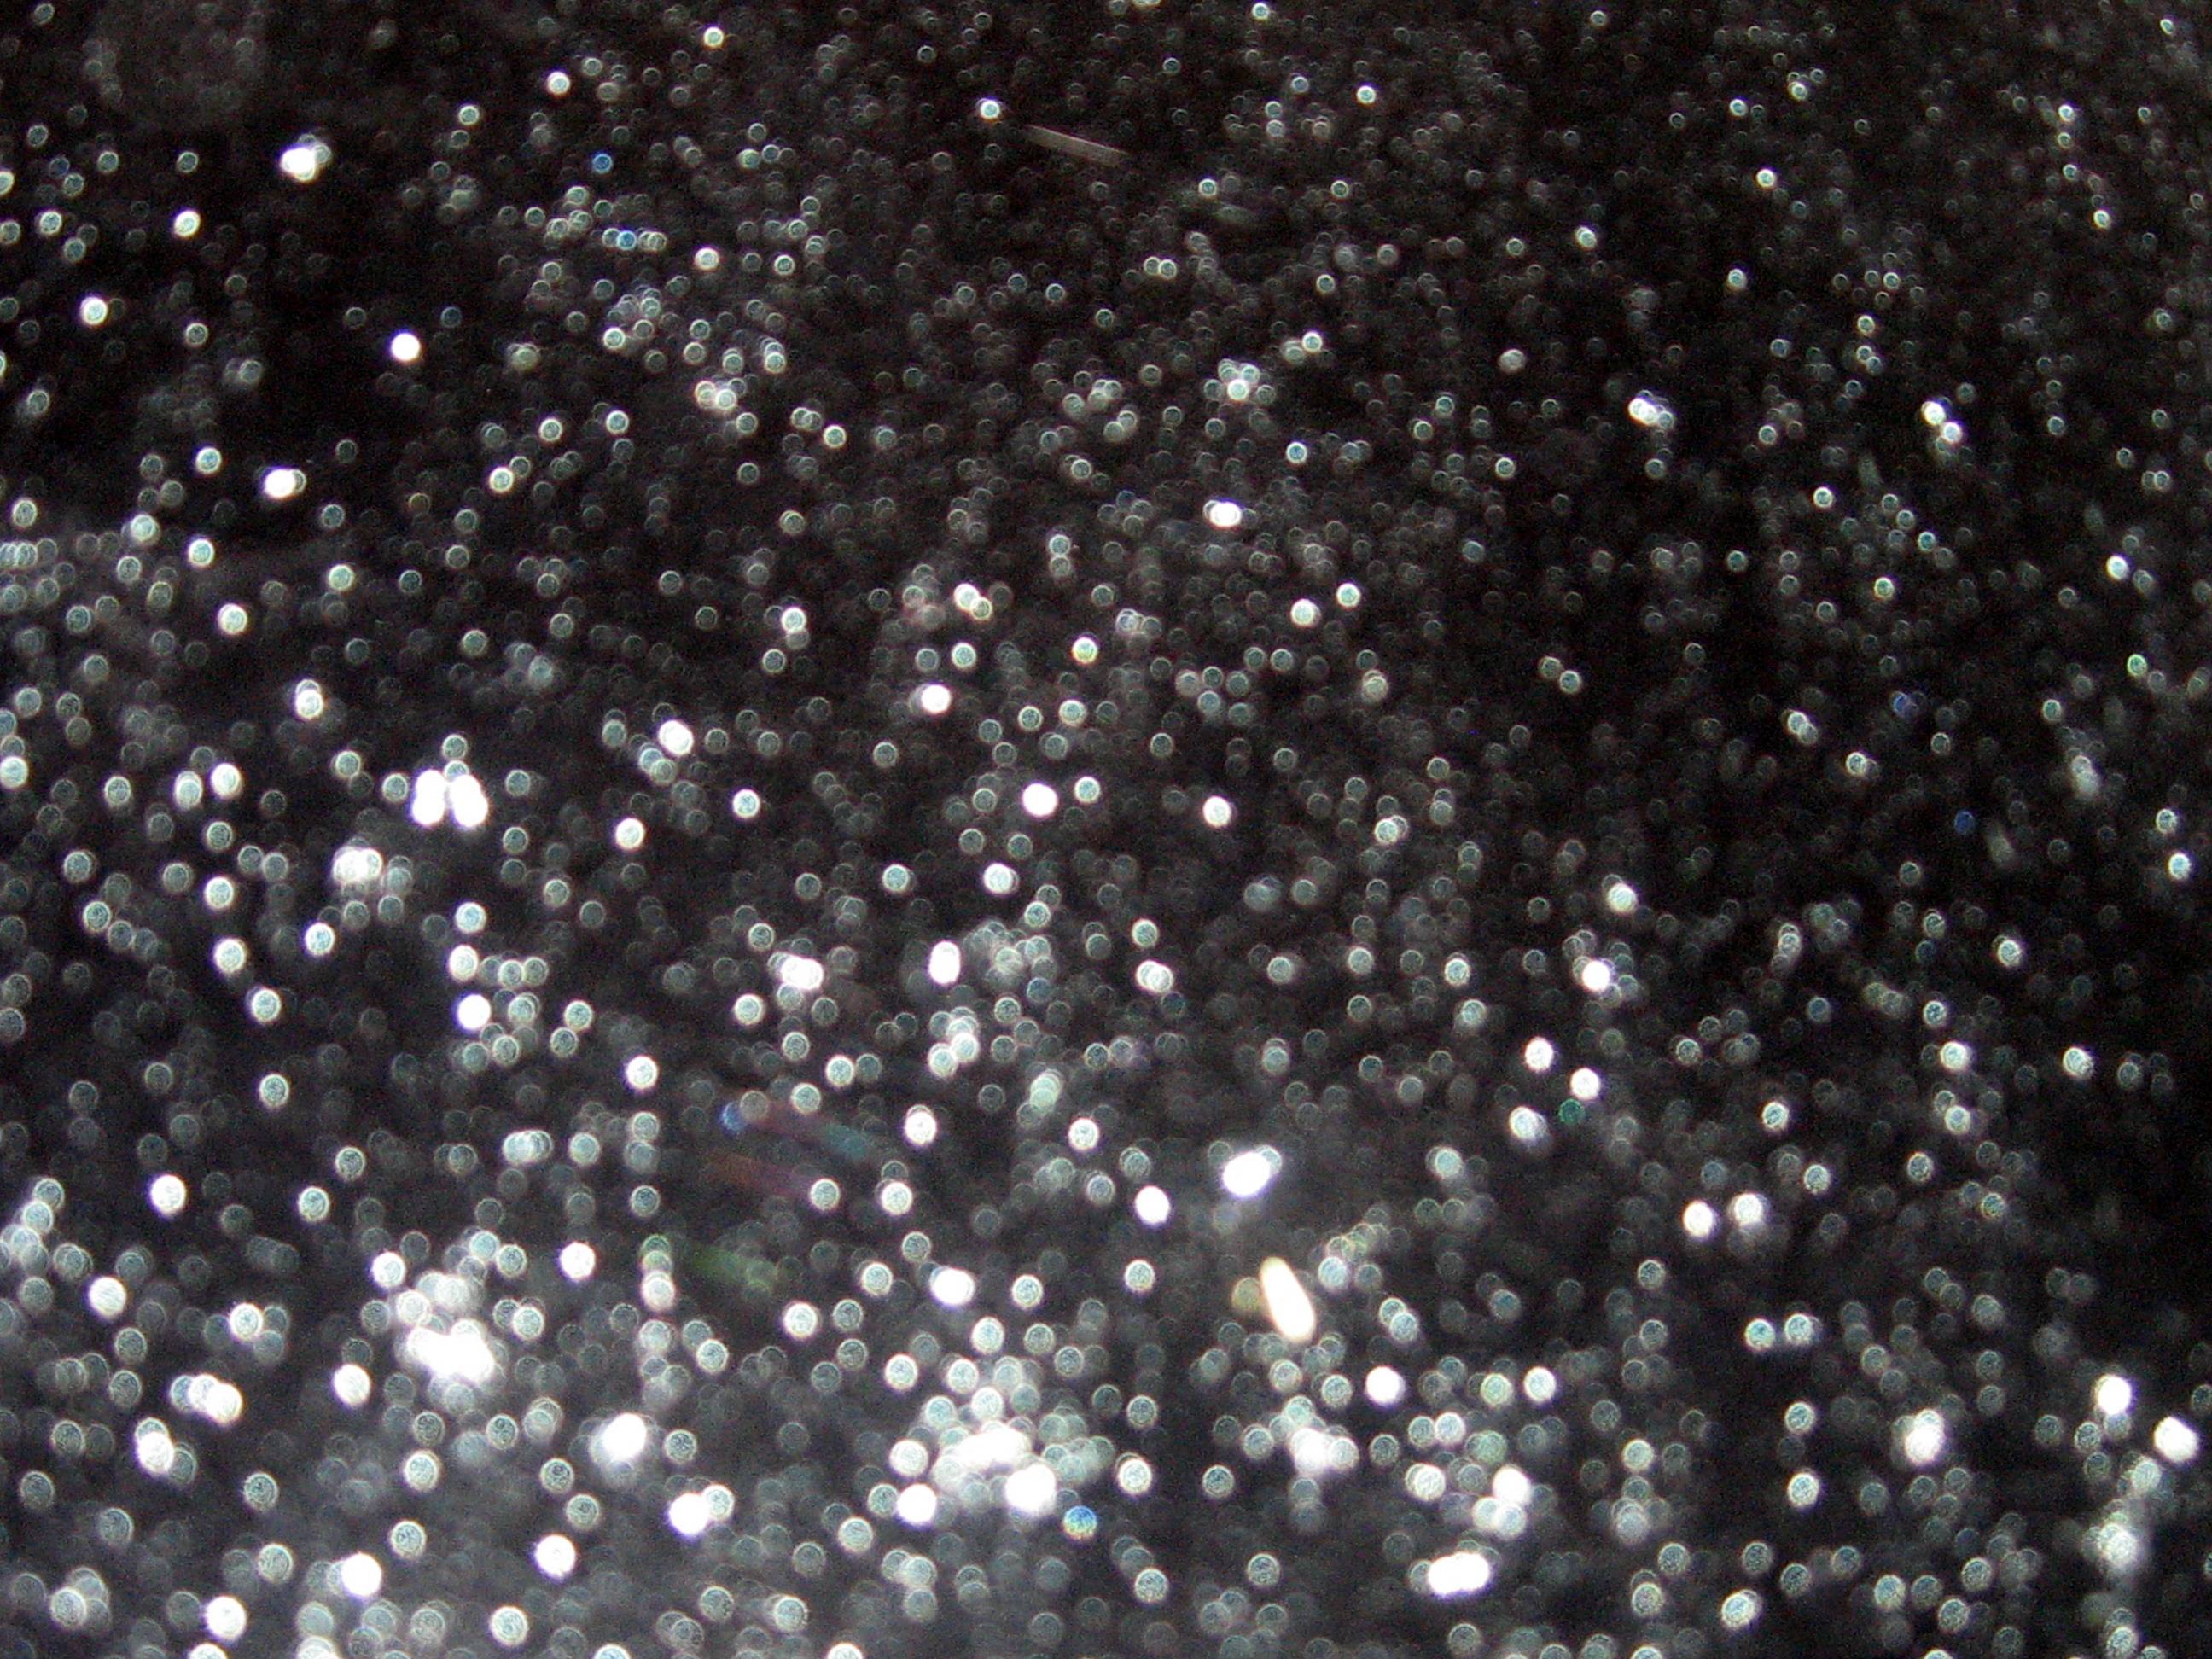 Glitter Wallpapers Free Wallpaper Cave